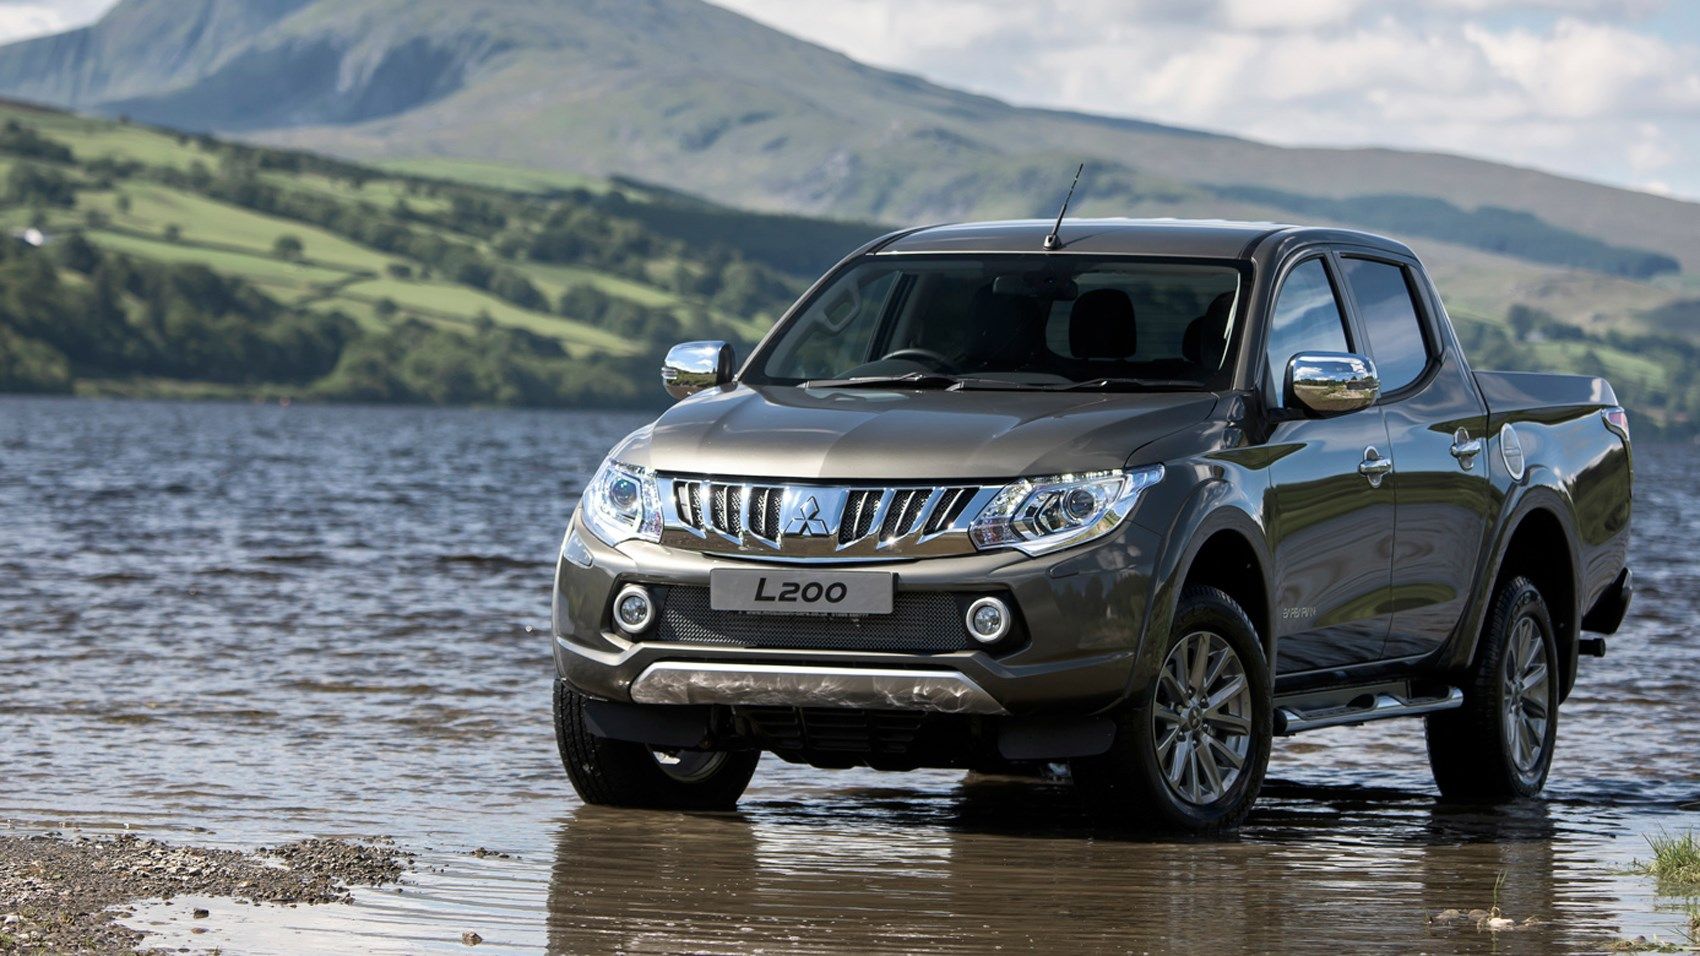 2016 Mitsubishi L200 - Trinton- Series-5 pickup parked in shallow water with mountains in background